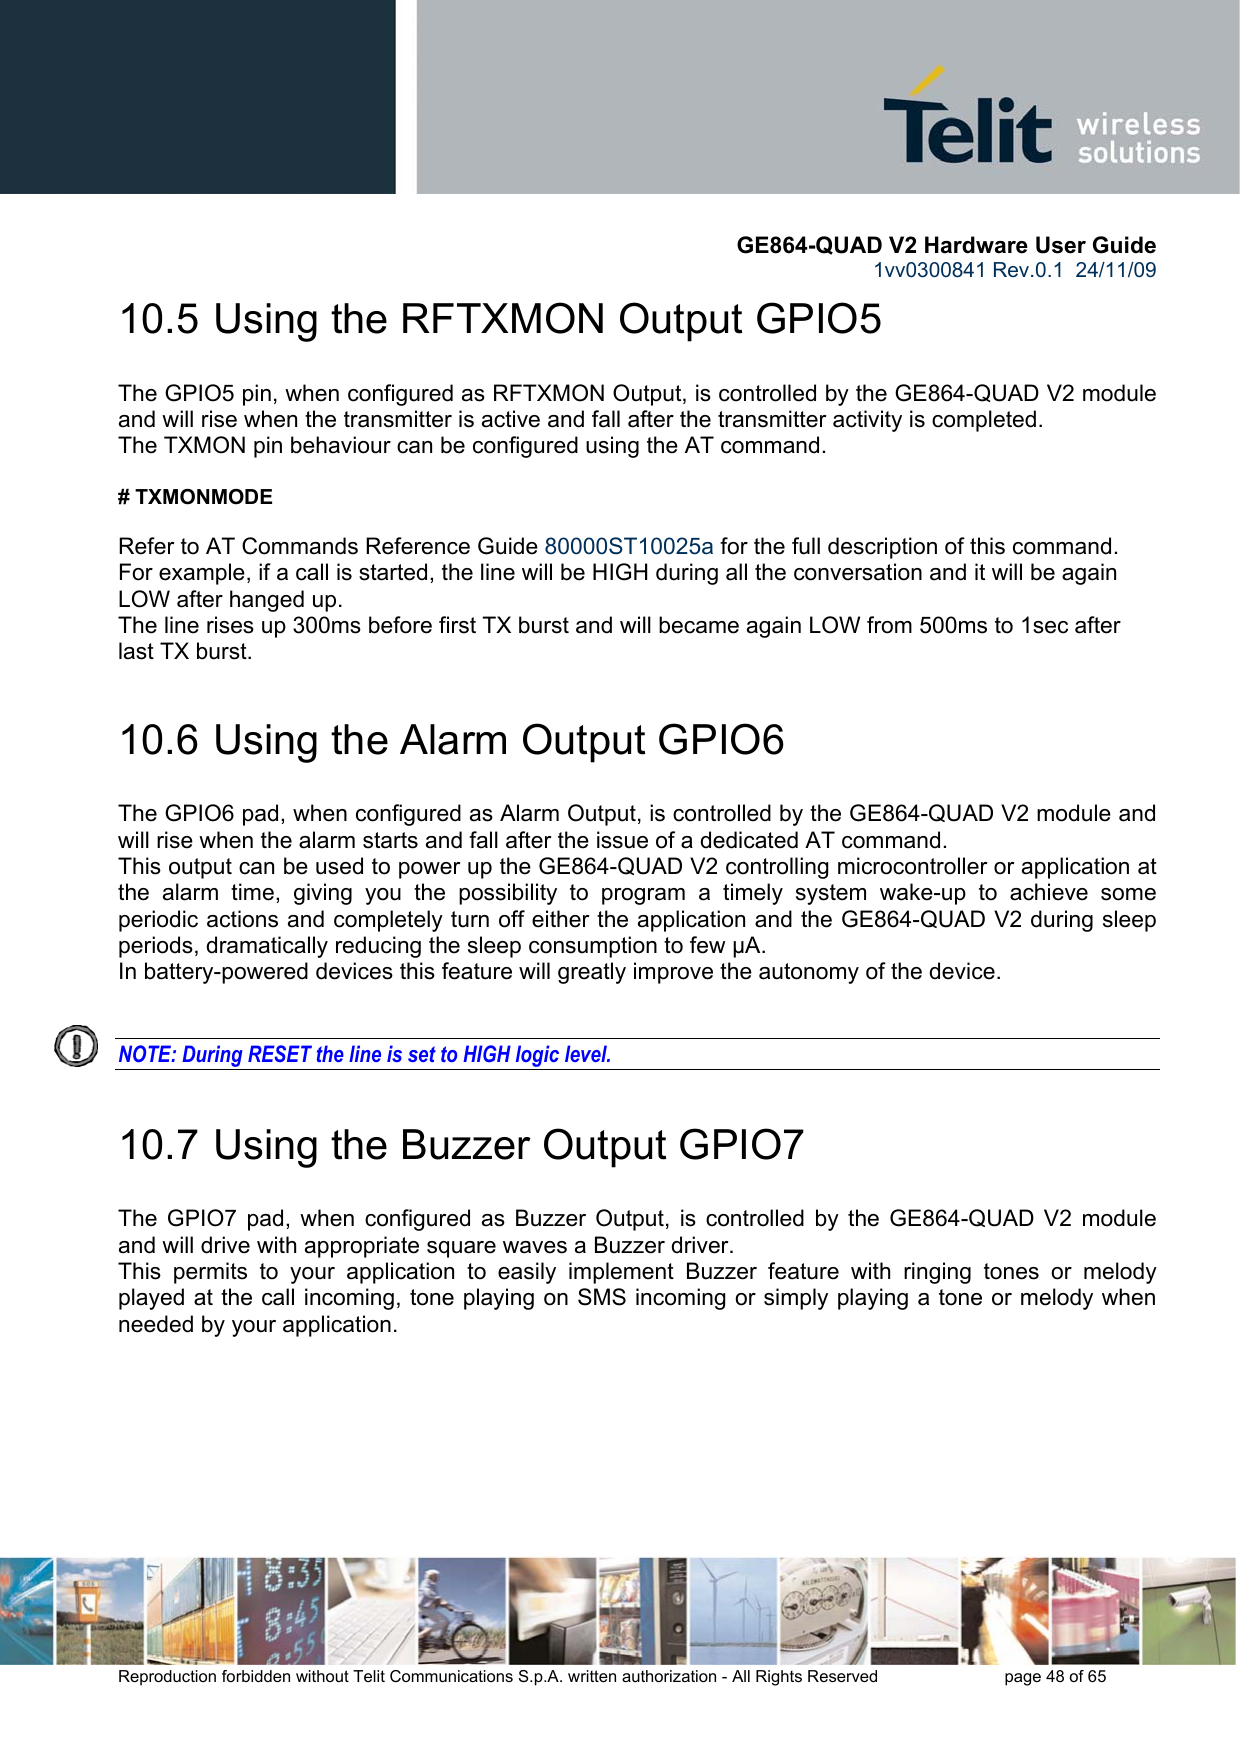       GE864-QUAD V2 Hardware User Guide 1vv0300841 Rev.0.1  24/11/09      Reproduction forbidden without Telit Communications S.p.A. written authorization - All Rights Reserved    page 48 of 65  10.5  Using the RFTXMON Output GPIO5 The GPIO5 pin, when configured as RFTXMON Output, is controlled by the GE864-QUAD V2 module and will rise when the transmitter is active and fall after the transmitter activity is completed. The TXMON pin behaviour can be configured using the AT command.   # TXMONMODE   Refer to AT Commands Reference Guide 80000ST10025a for the full description of this command. For example, if a call is started, the line will be HIGH during all the conversation and it will be again LOW after hanged up. The line rises up 300ms before first TX burst and will became again LOW from 500ms to 1sec after last TX burst. 10.6  Using the Alarm Output GPIO6 The GPIO6 pad, when configured as Alarm Output, is controlled by the GE864-QUAD V2 module and will rise when the alarm starts and fall after the issue of a dedicated AT command. This output can be used to power up the GE864-QUAD V2 controlling microcontroller or application at the alarm time, giving you the possibility to program a timely system wake-up to achieve some periodic actions and completely turn off either the application and the GE864-QUAD V2 during sleep periods, dramatically reducing the sleep consumption to few μA. In battery-powered devices this feature will greatly improve the autonomy of the device.   NOTE: During RESET the line is set to HIGH logic level. 10.7  Using the Buzzer Output GPIO7 The GPIO7 pad, when configured as Buzzer Output, is controlled by the GE864-QUAD V2 module and will drive with appropriate square waves a Buzzer driver. This permits to your application to easily implement Buzzer feature with ringing tones or melody played at the call incoming, tone playing on SMS incoming or simply playing a tone or melody when needed by your application. 